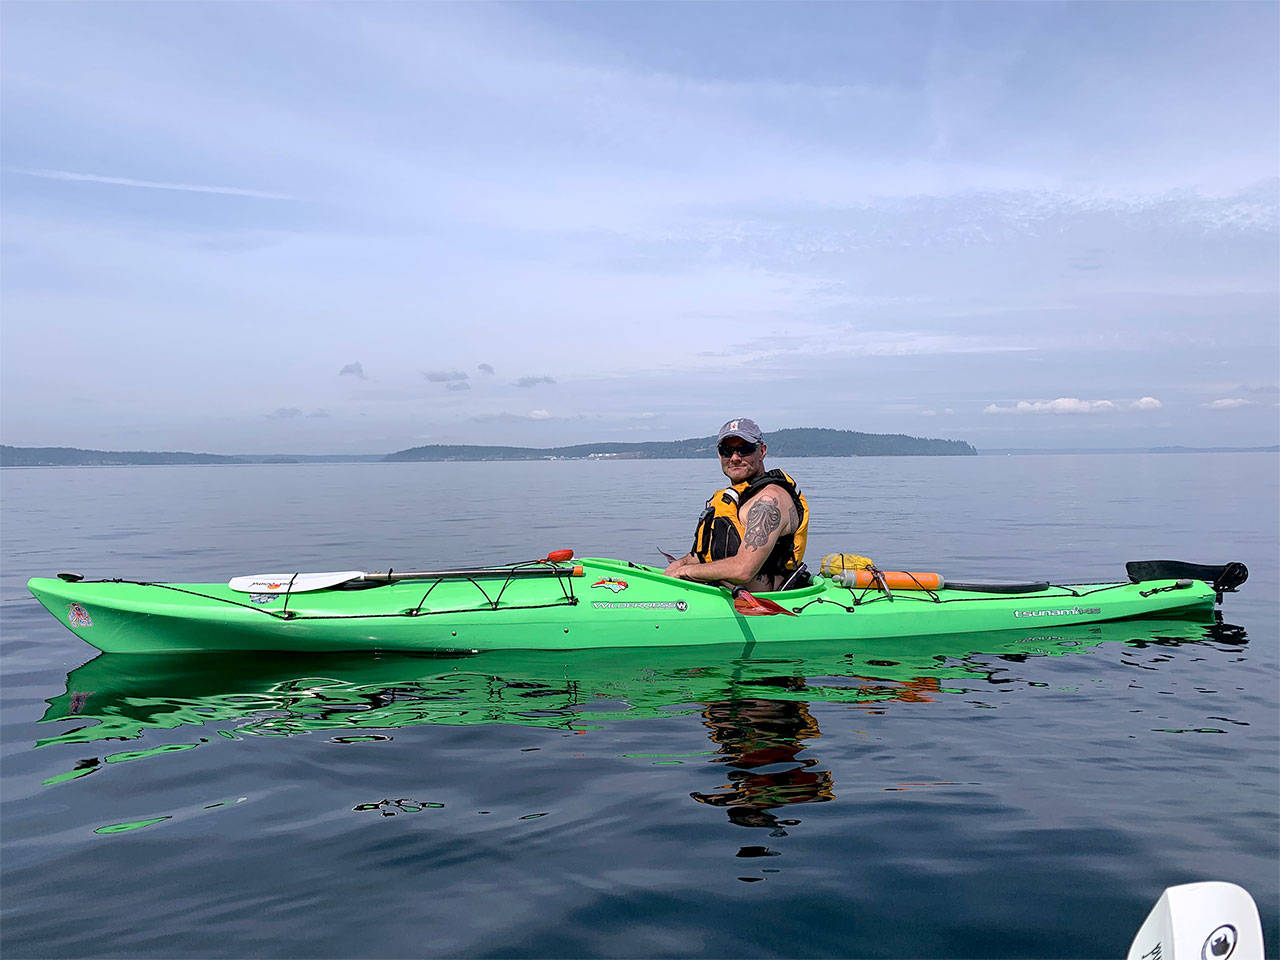 Whidbey Island Boats and Boards owner Steve Adams has paddled all over the world, but says Whidbey Island’s world-class scenery make it an ideal place to explore. Photo provided.